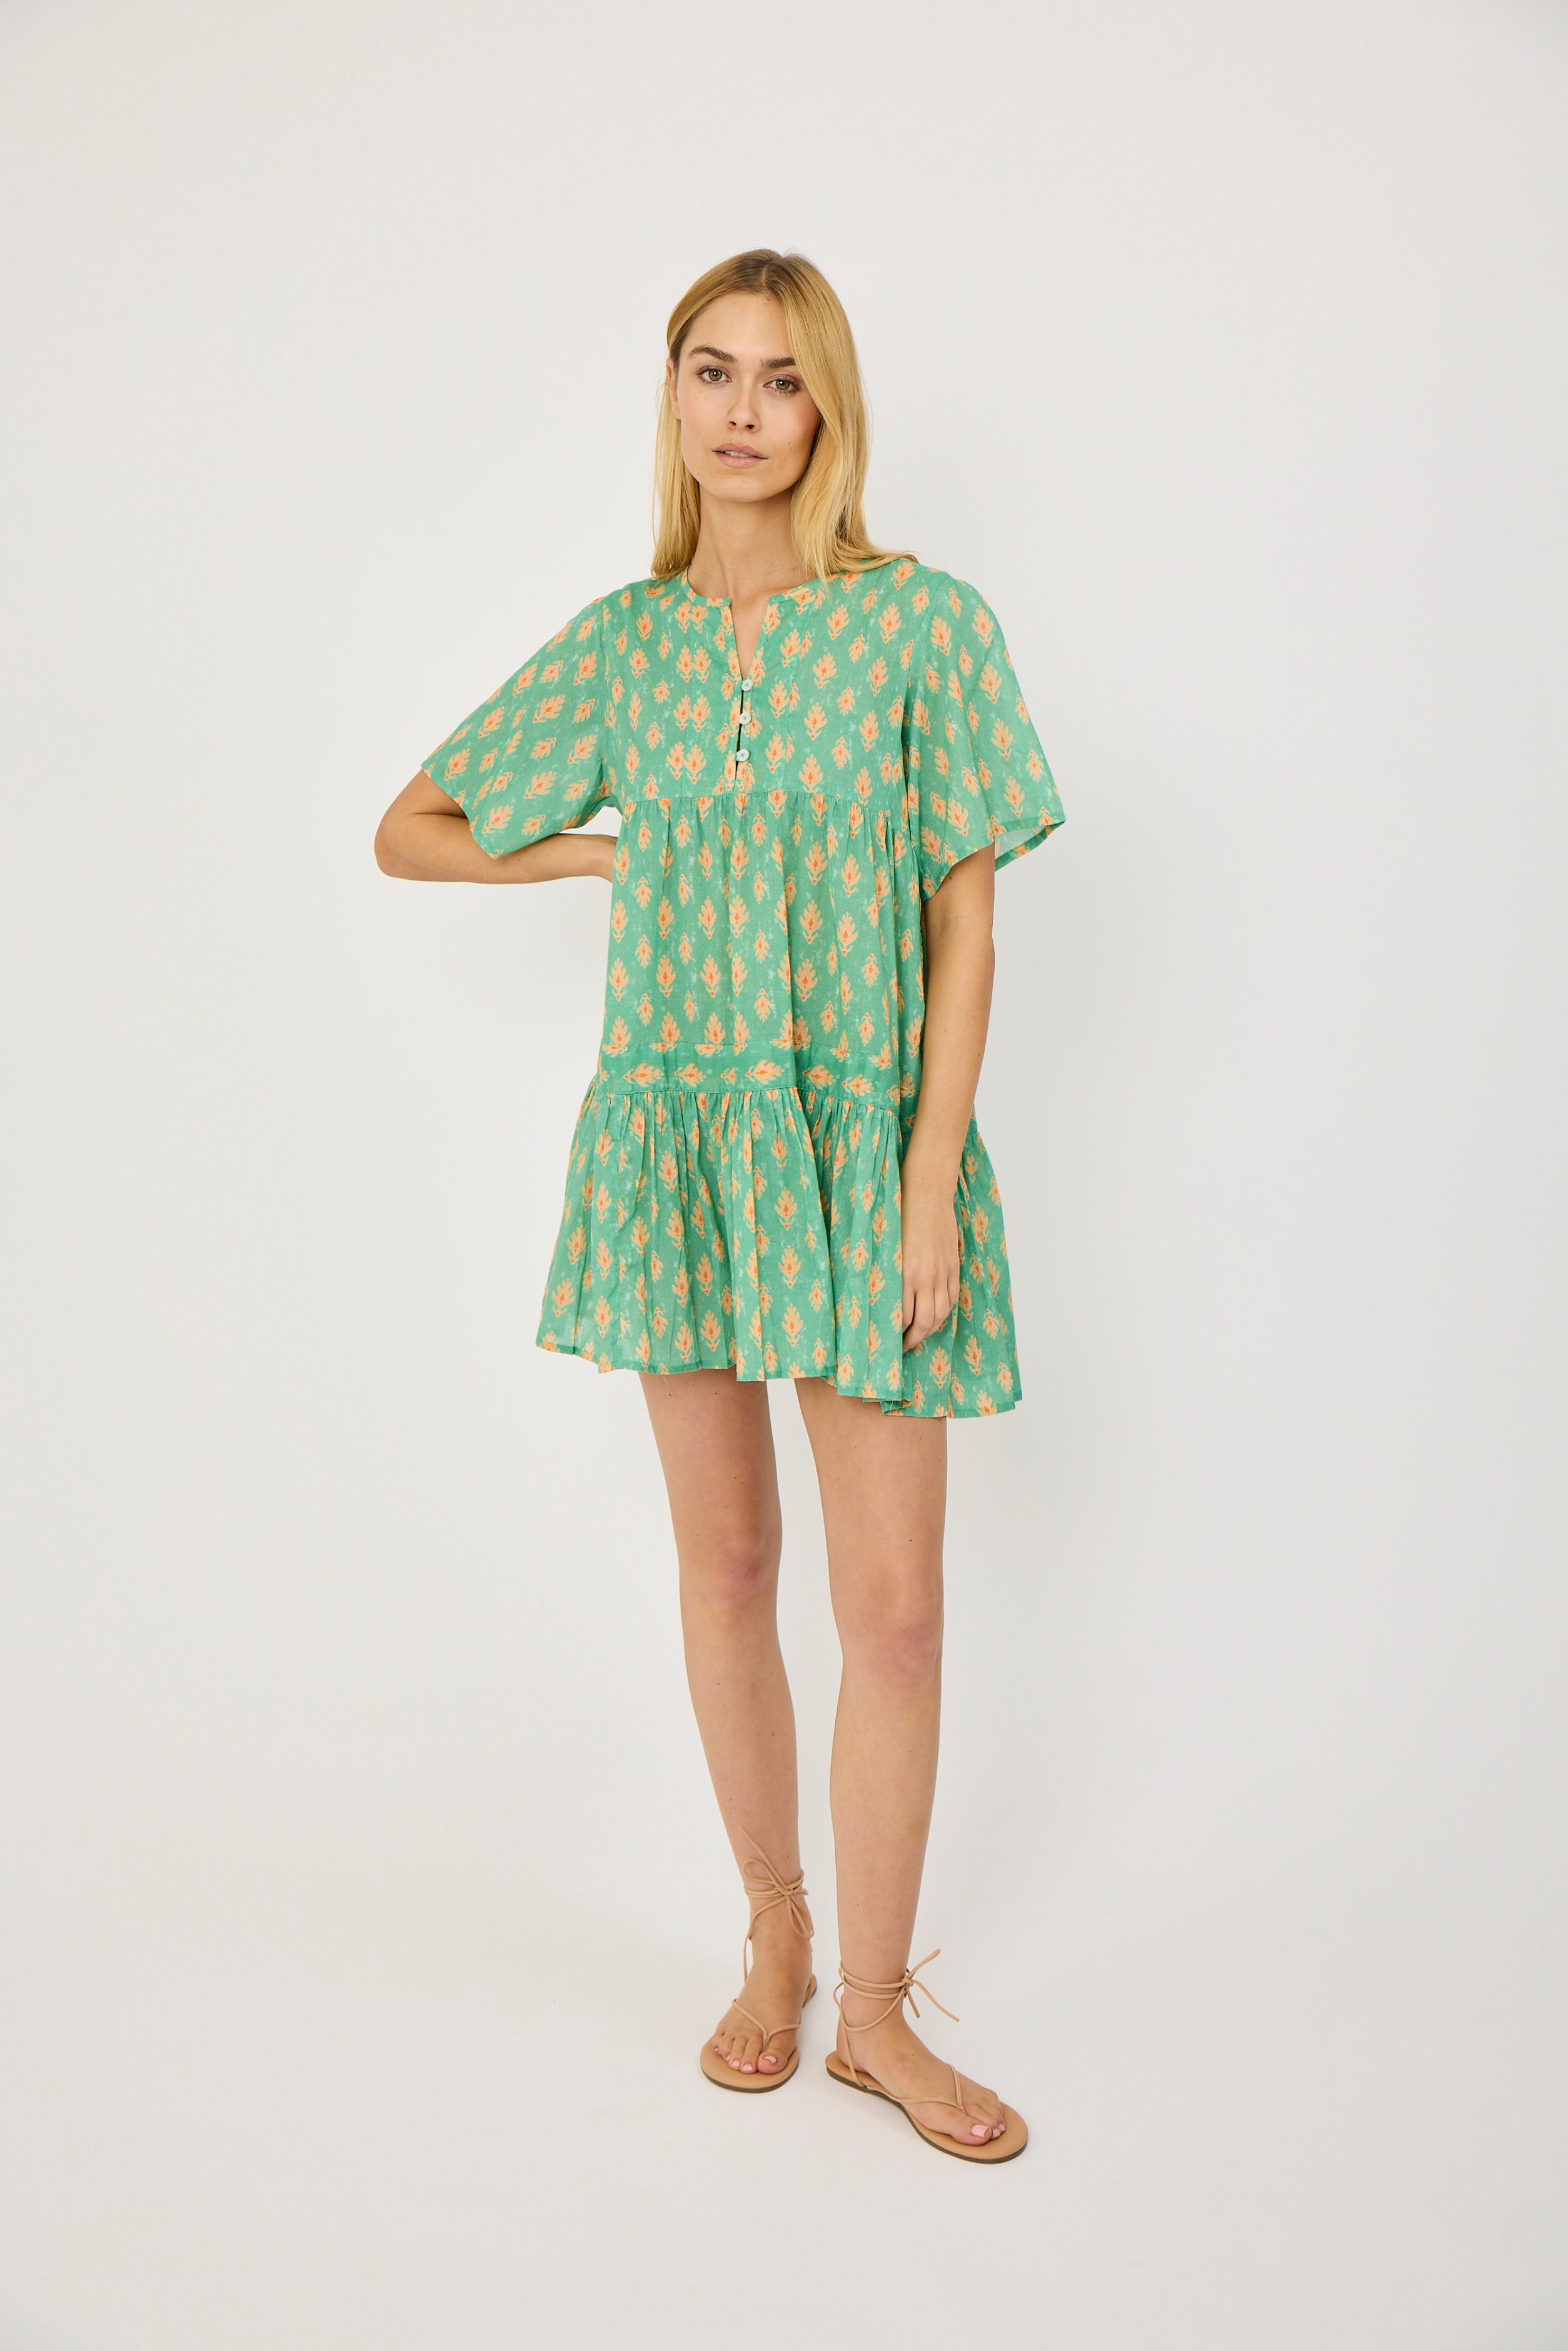 The Tiki Cover Up - Teal Coral